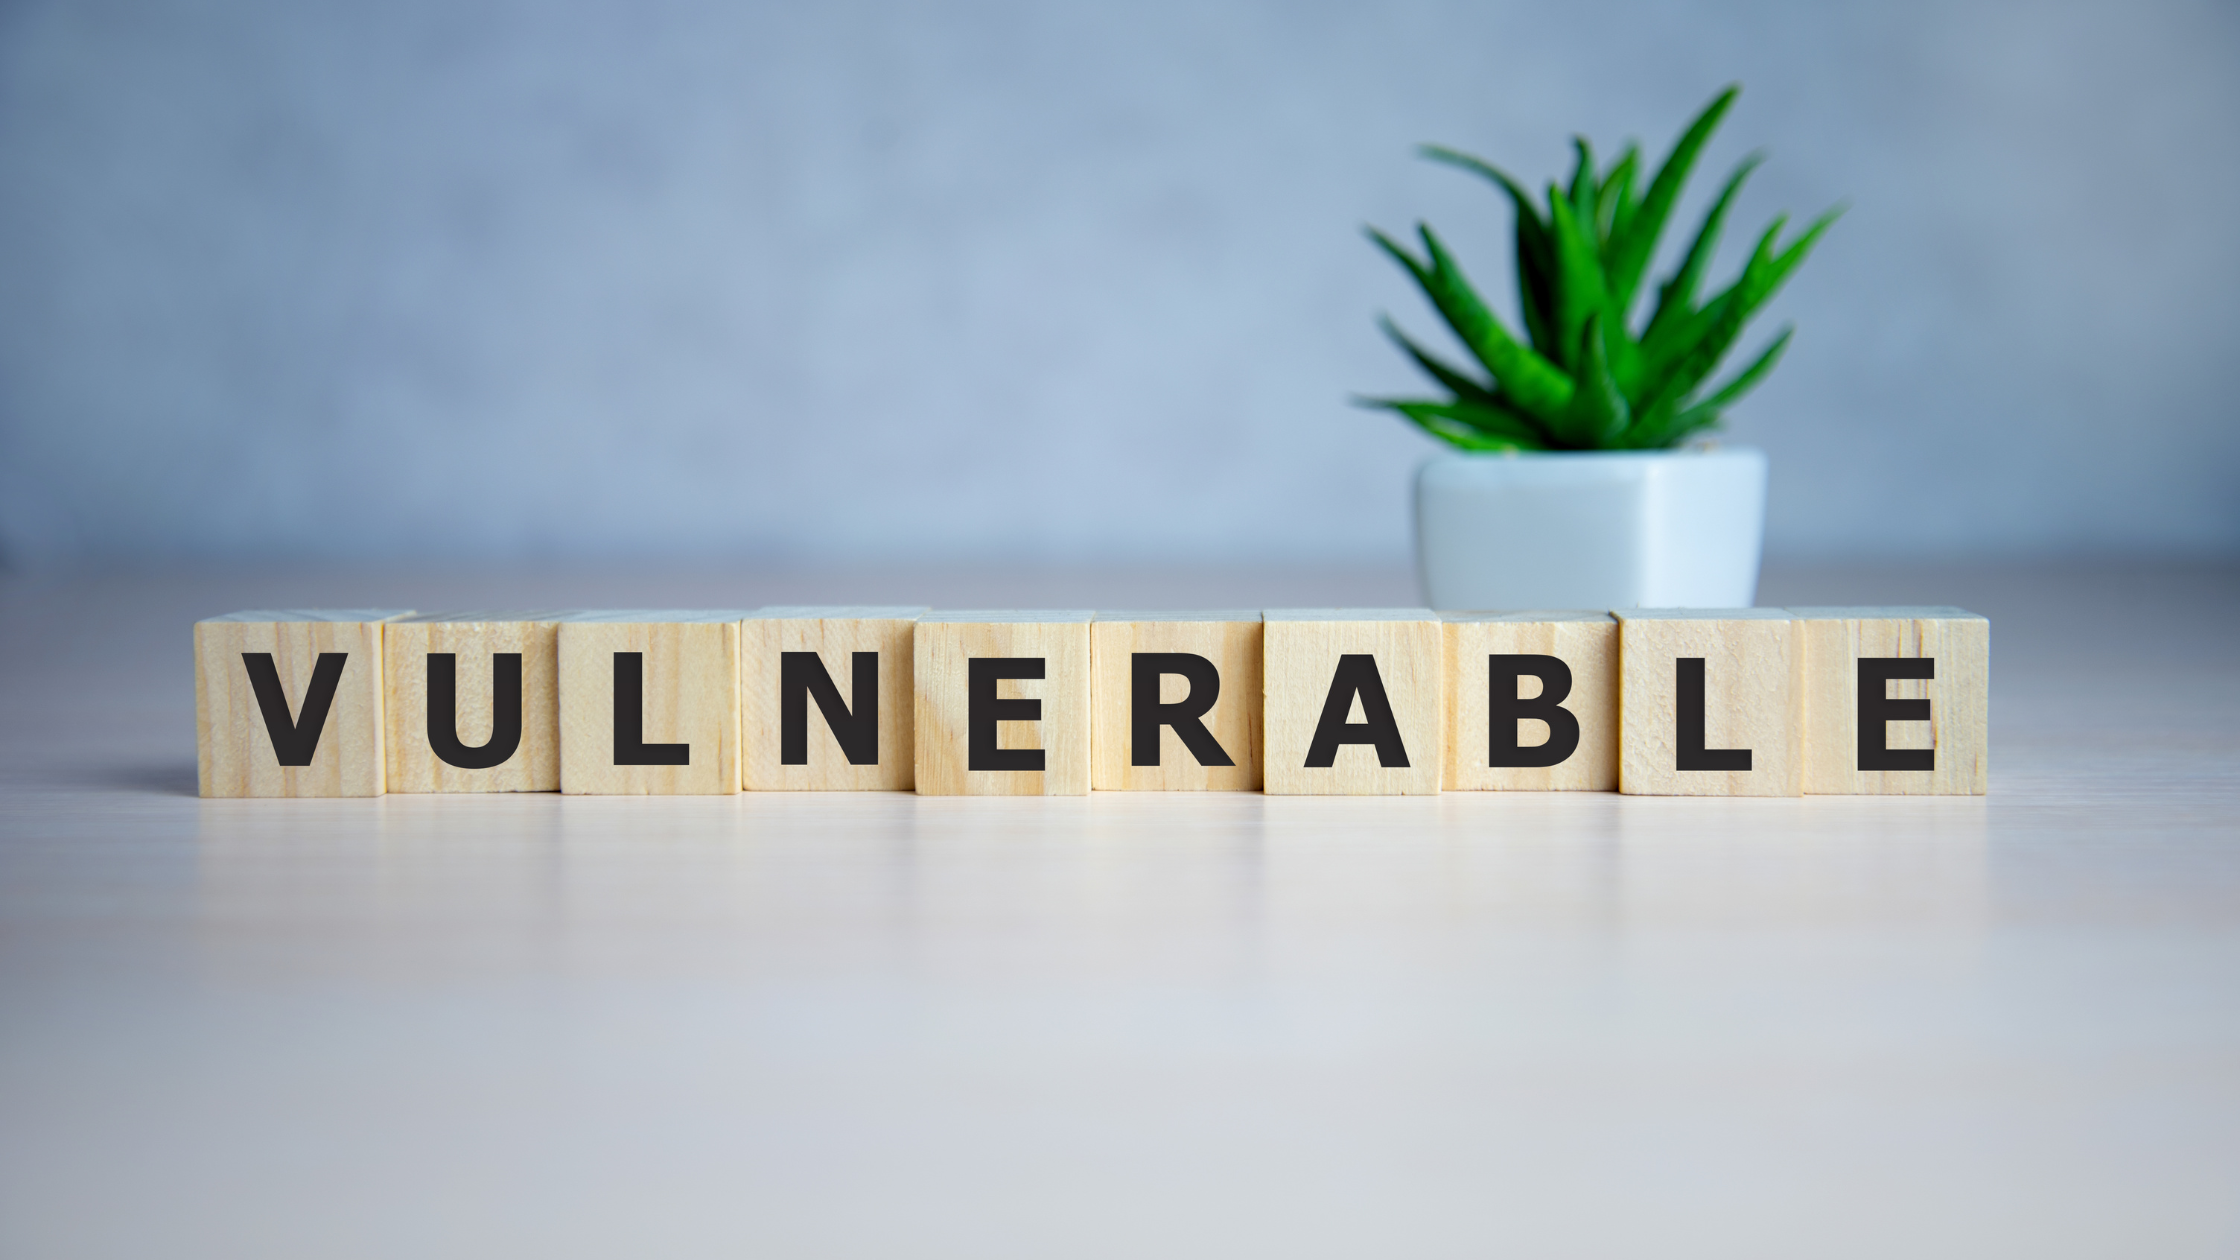 vulnerability is a sign of strength